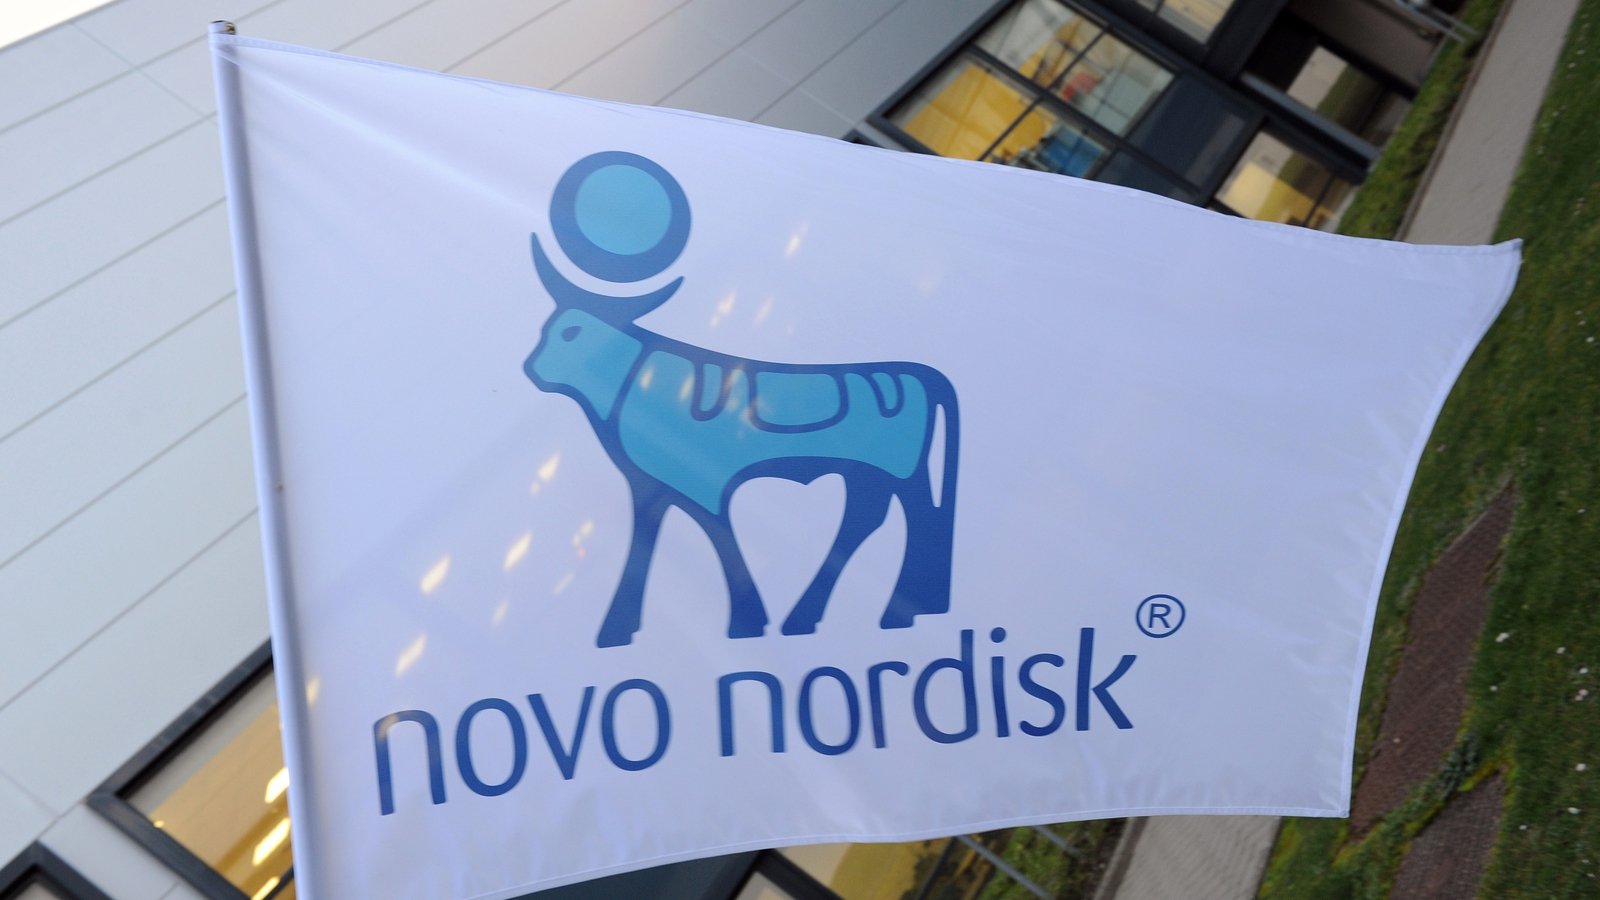 Novo Nordisk briefly overtakes LVMH as Europe's most valuable